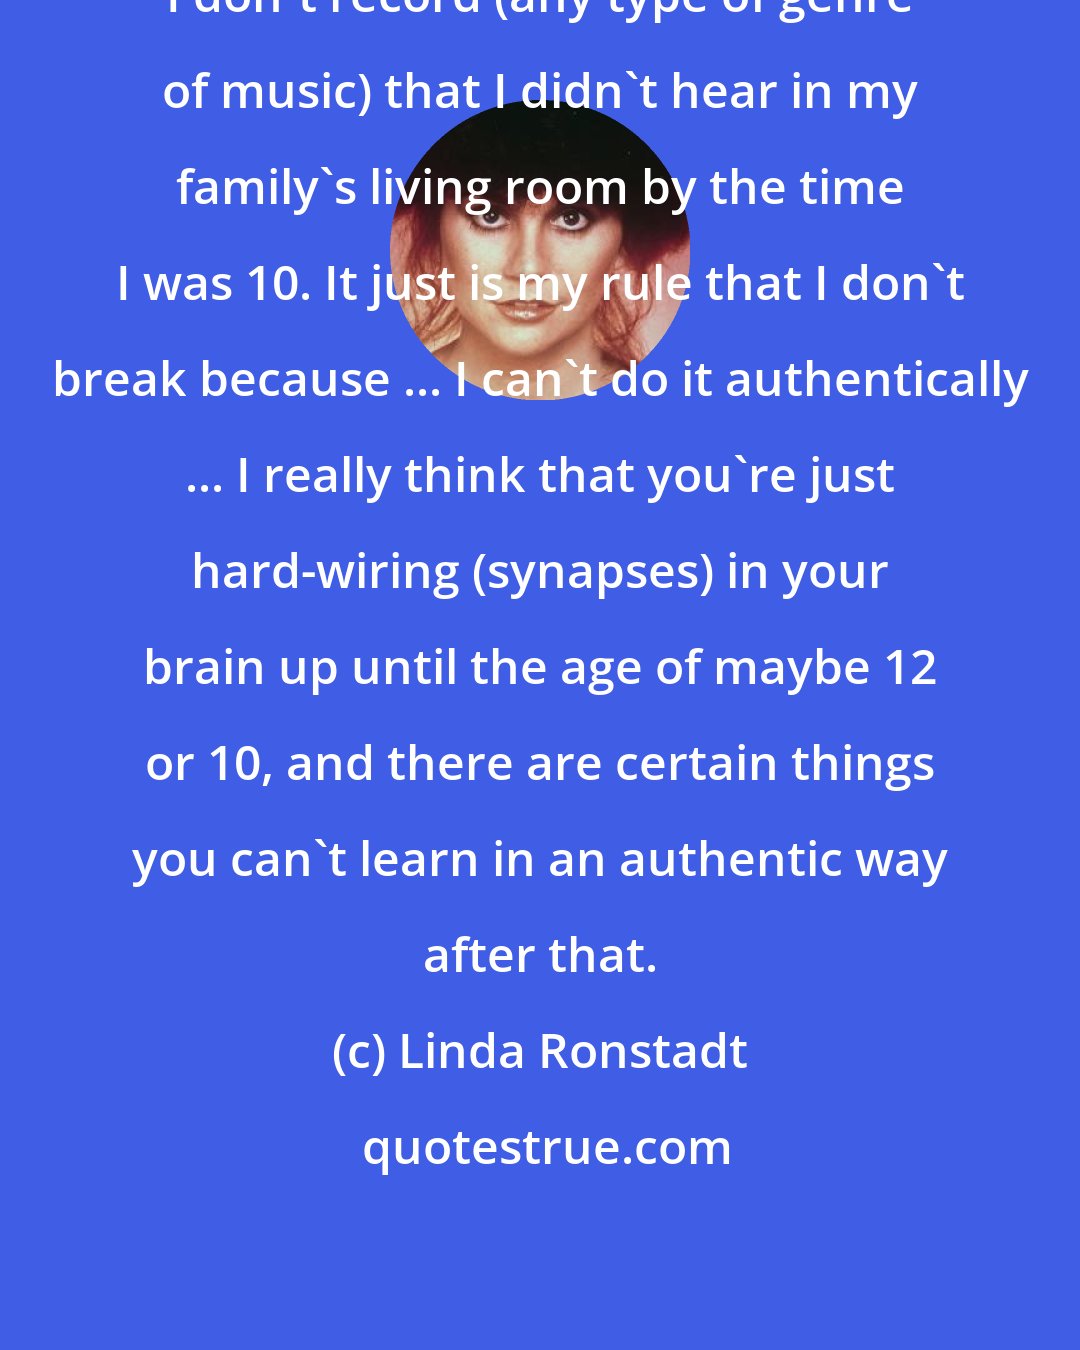 Linda Ronstadt: I don't record (any type of genre of music) that I didn't hear in my family's living room by the time I was 10. It just is my rule that I don't break because ... I can't do it authentically ... I really think that you're just hard-wiring (synapses) in your brain up until the age of maybe 12 or 10, and there are certain things you can't learn in an authentic way after that.